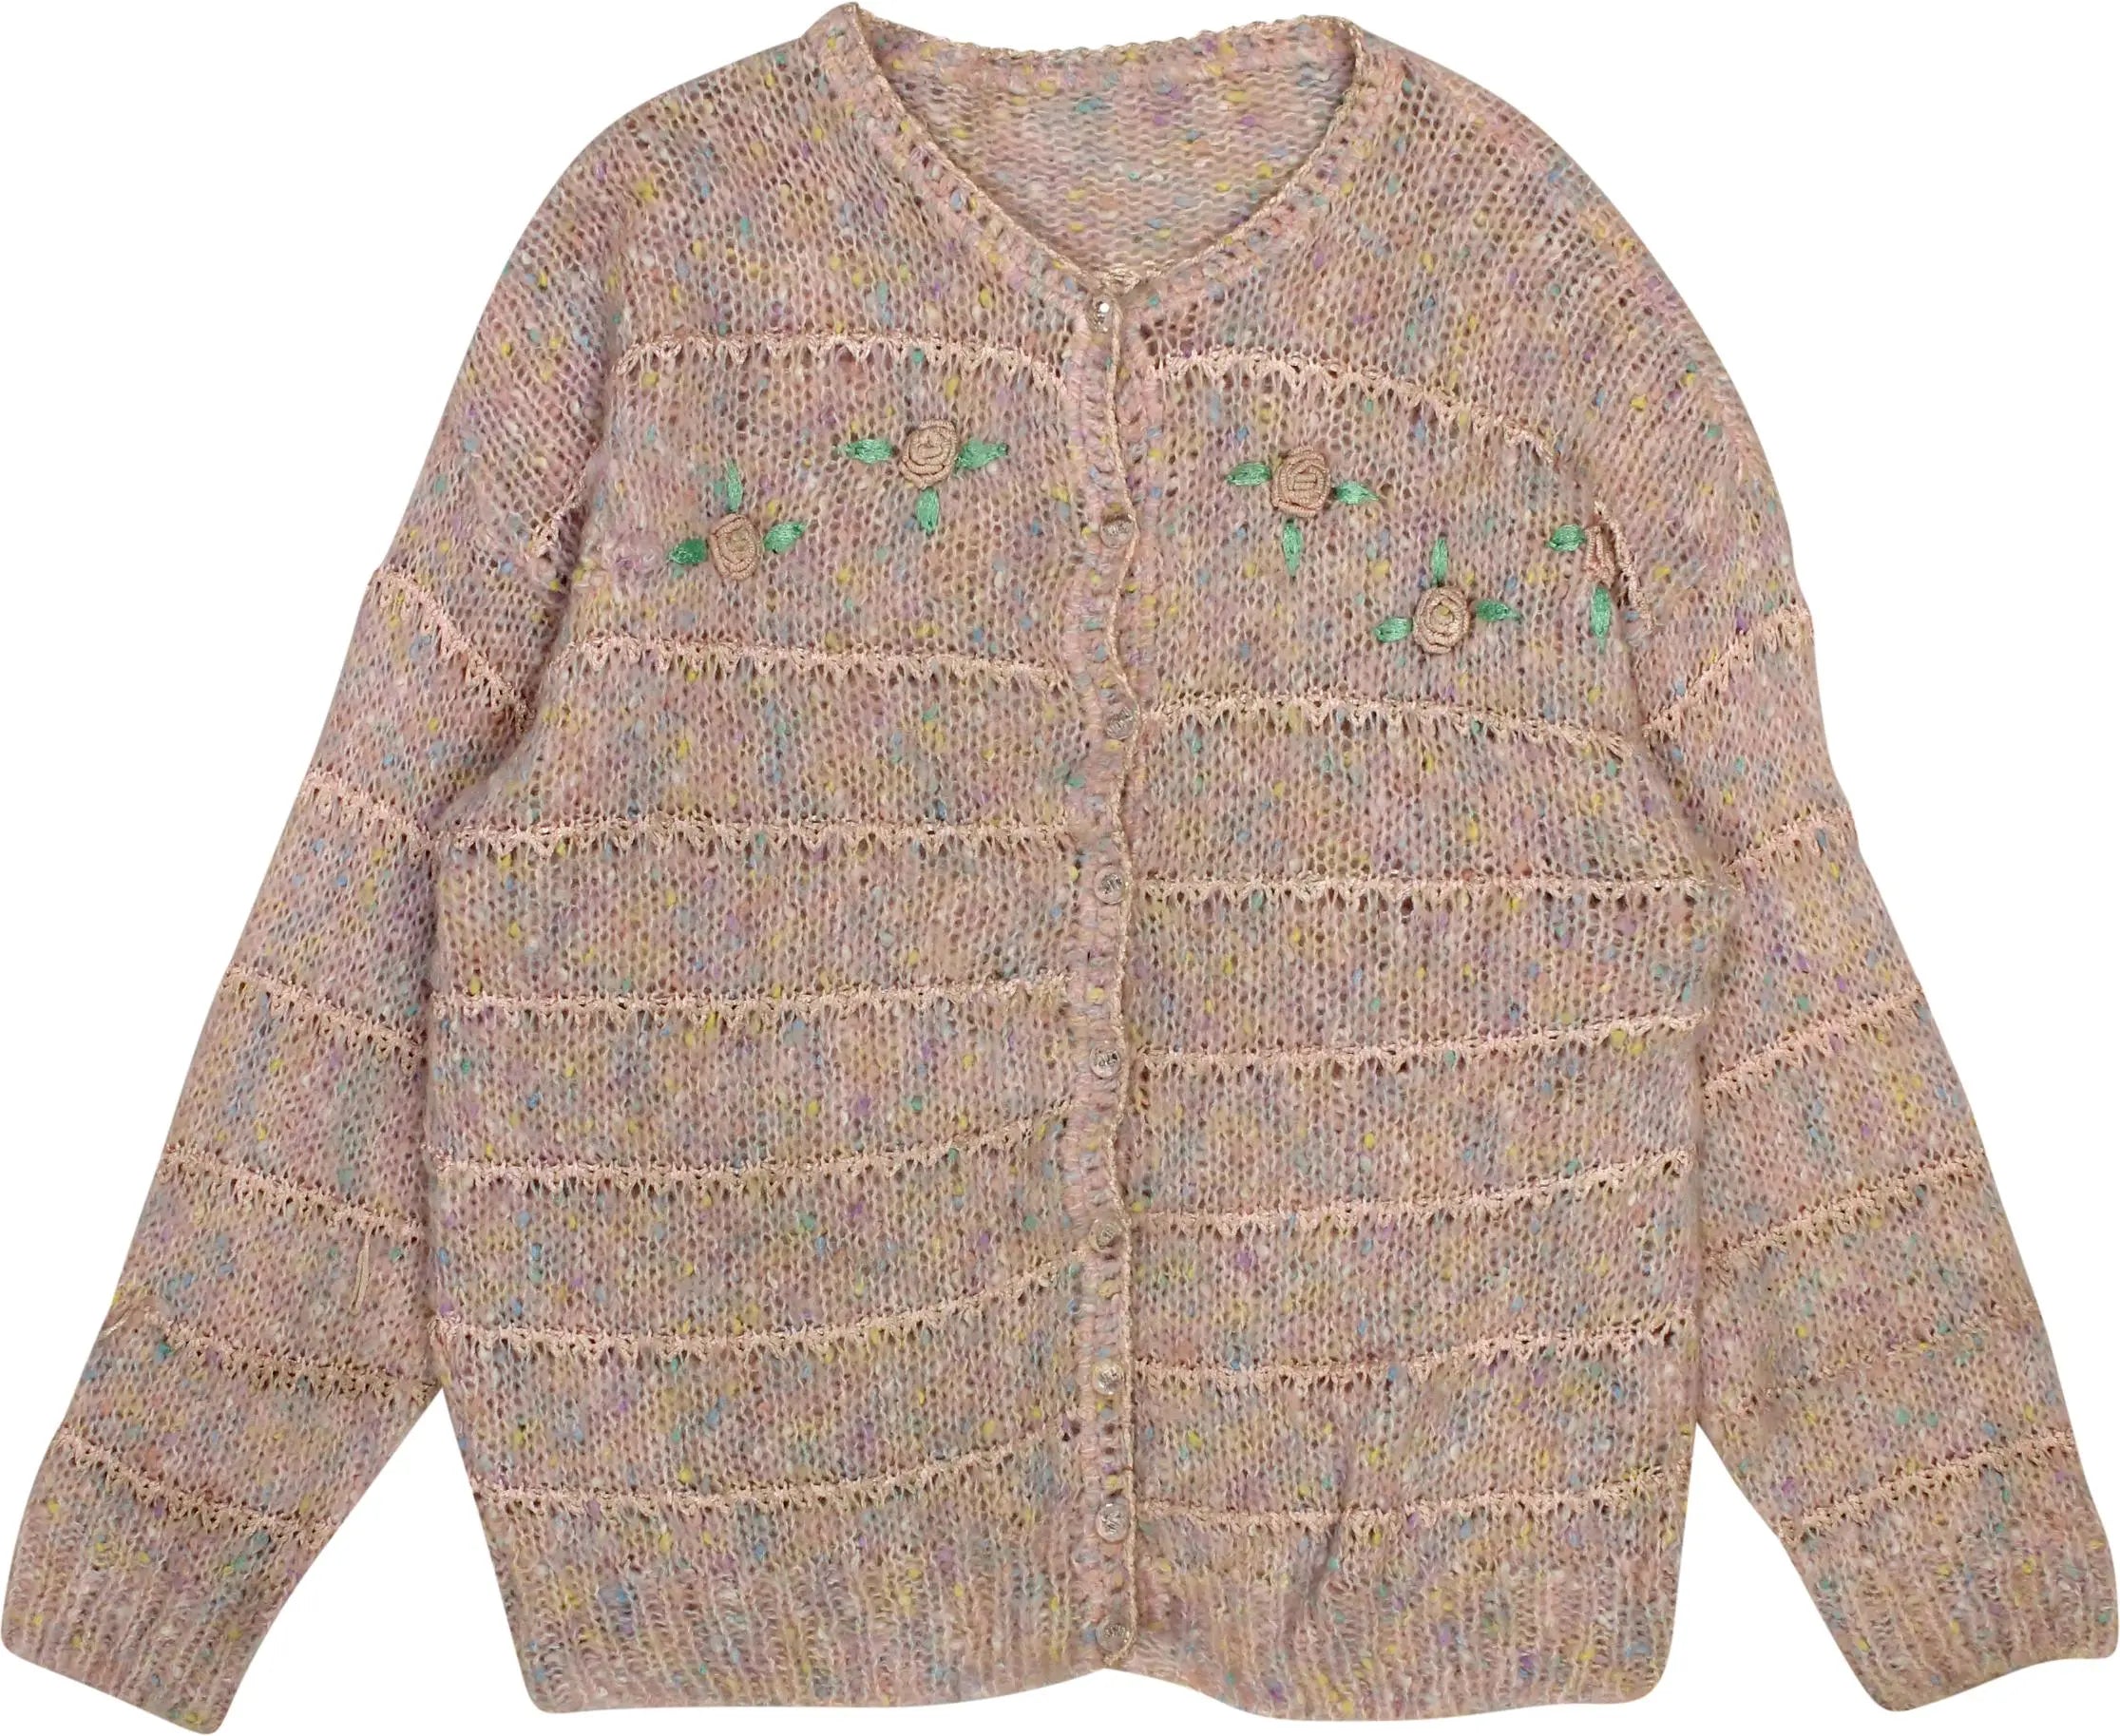 Unknown - 80s Cardigan- ThriftTale.com - Vintage and second handclothing